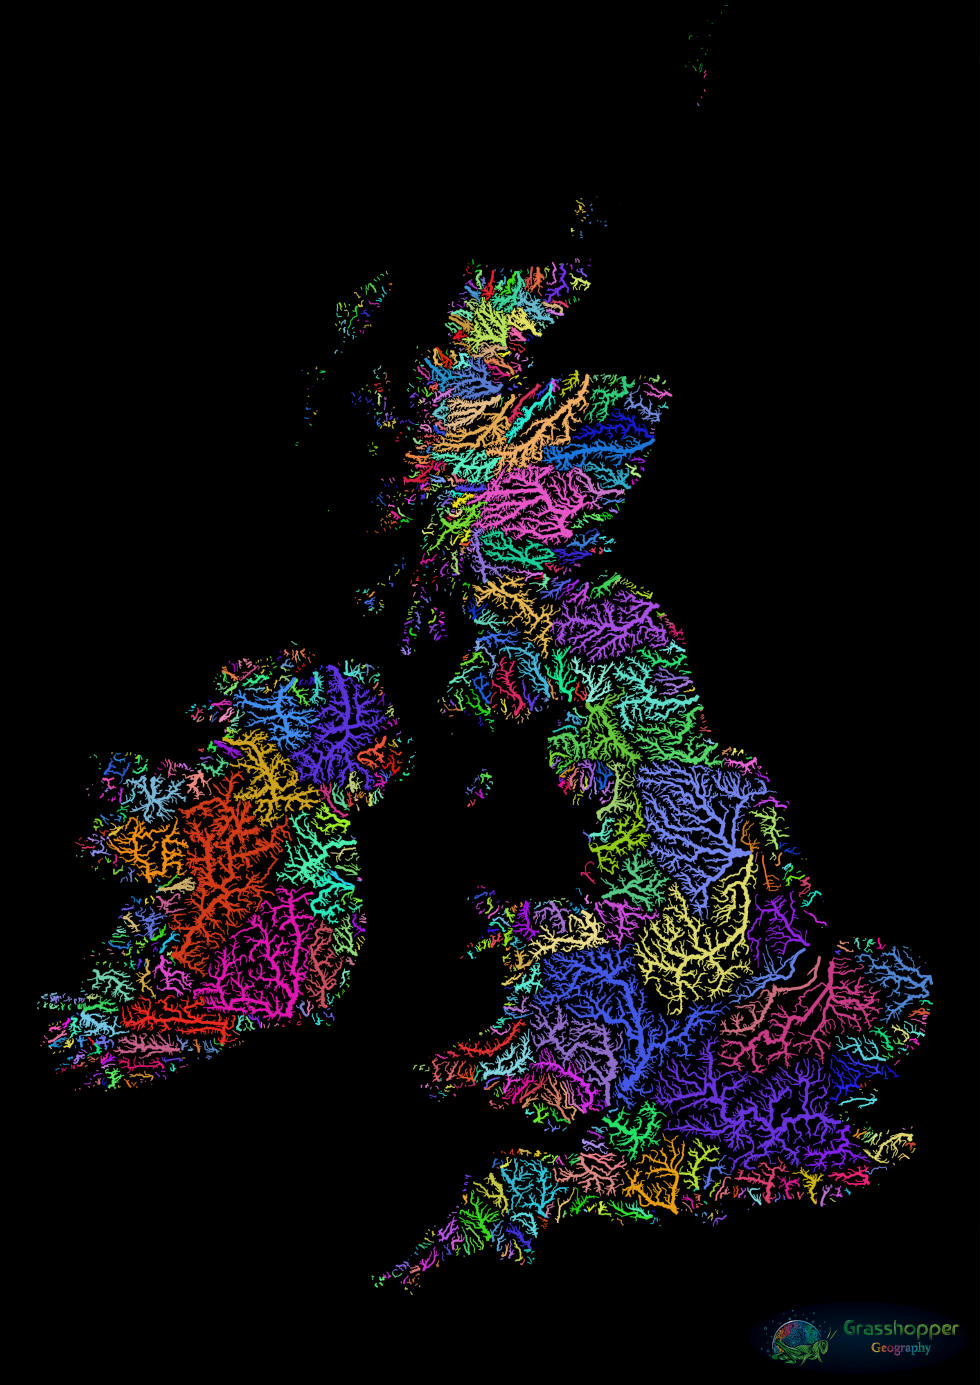  Both Ireland and Great Britain are islands, as a result of which neither boasts a continental-class river. Twenty of the 30 longest British rivers are less than 100 miles (160 km) long. The longest river in Britain is the Severn (220 miles, 354 km), its catchment area shown in blue in the southwest. Ireland's longest river is the Shannon (224 miles, 360 km). Even combined they're not as long as France's Seine (483 miles, 777 km). Image: Grasshopper Geography          